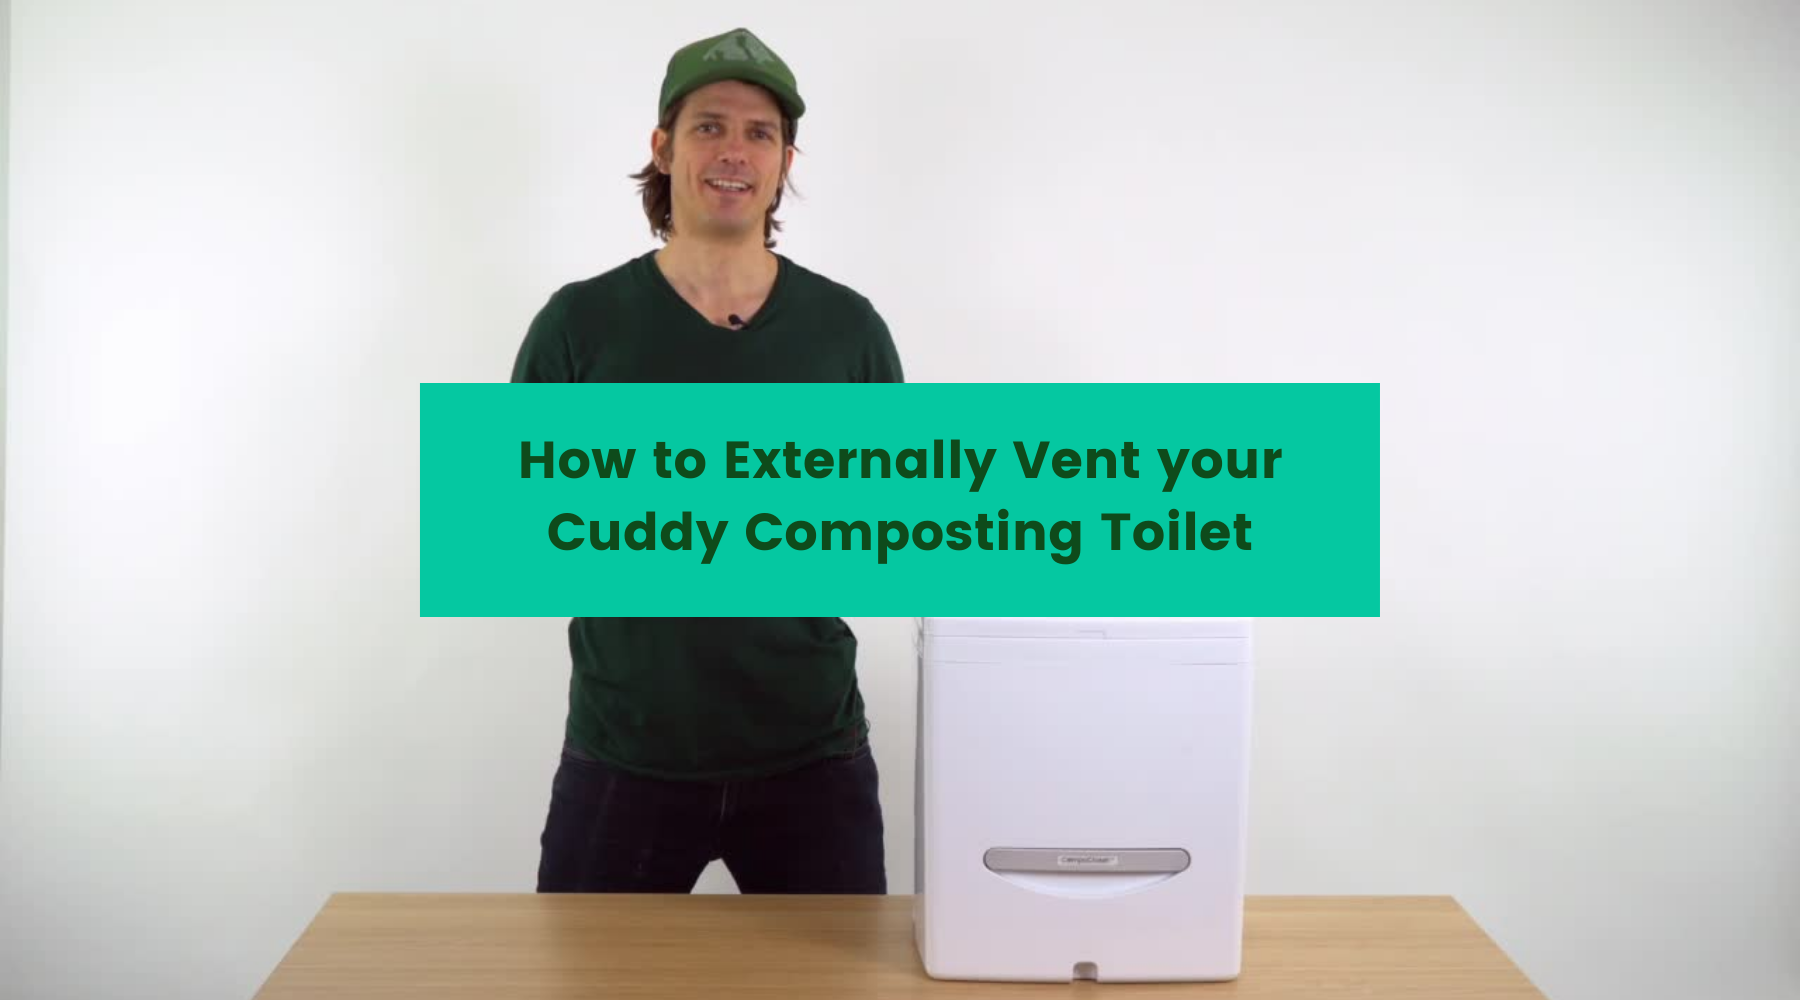 How to Externally Vent your Cuddy Composting Toilet